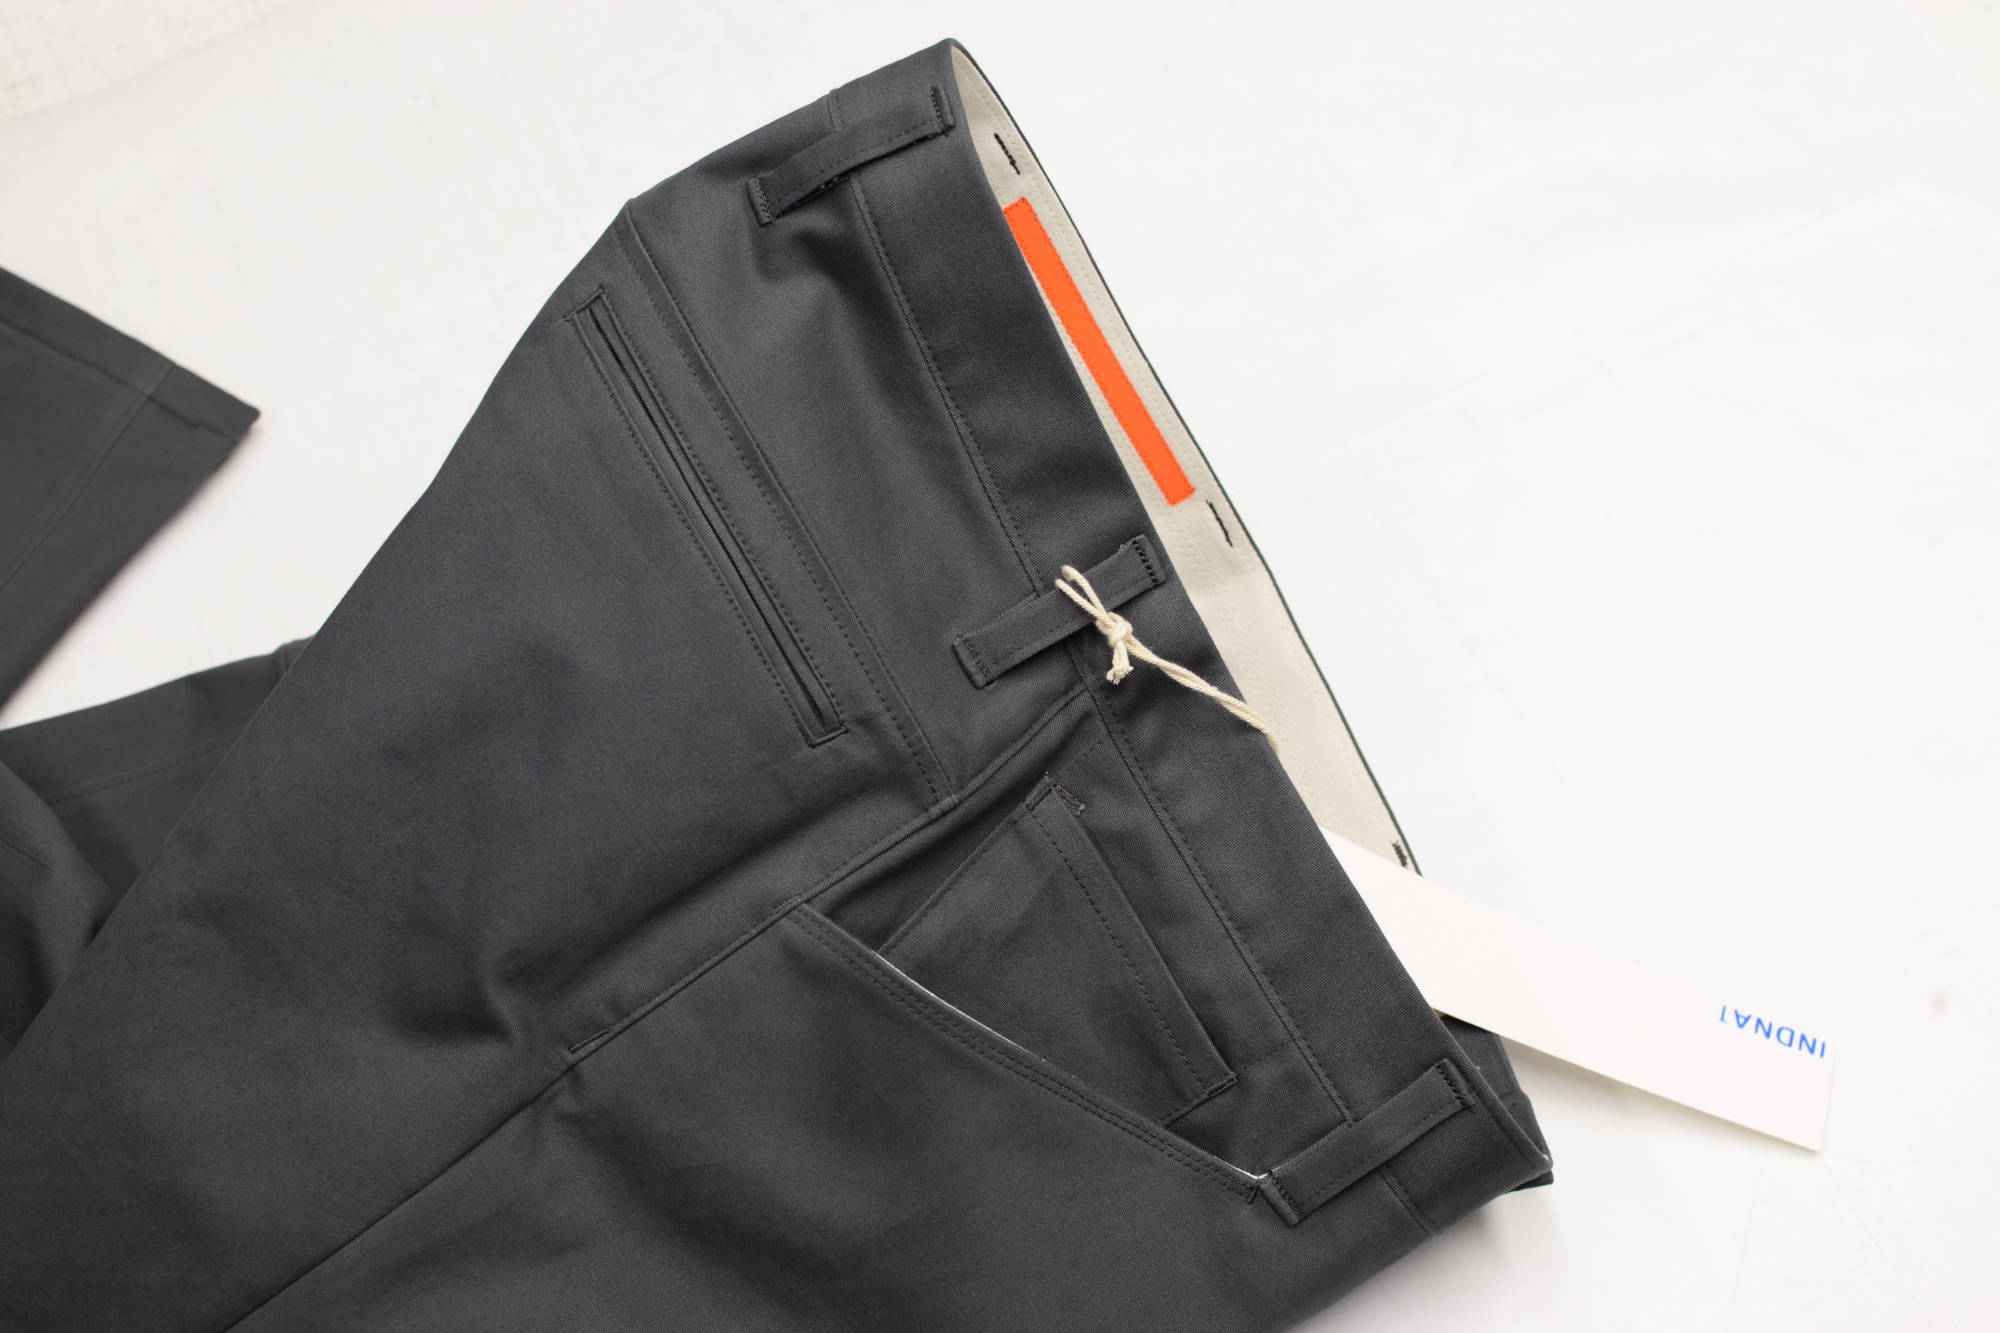 Some super nice grey twill commuter cycling chino trousers by indnat.